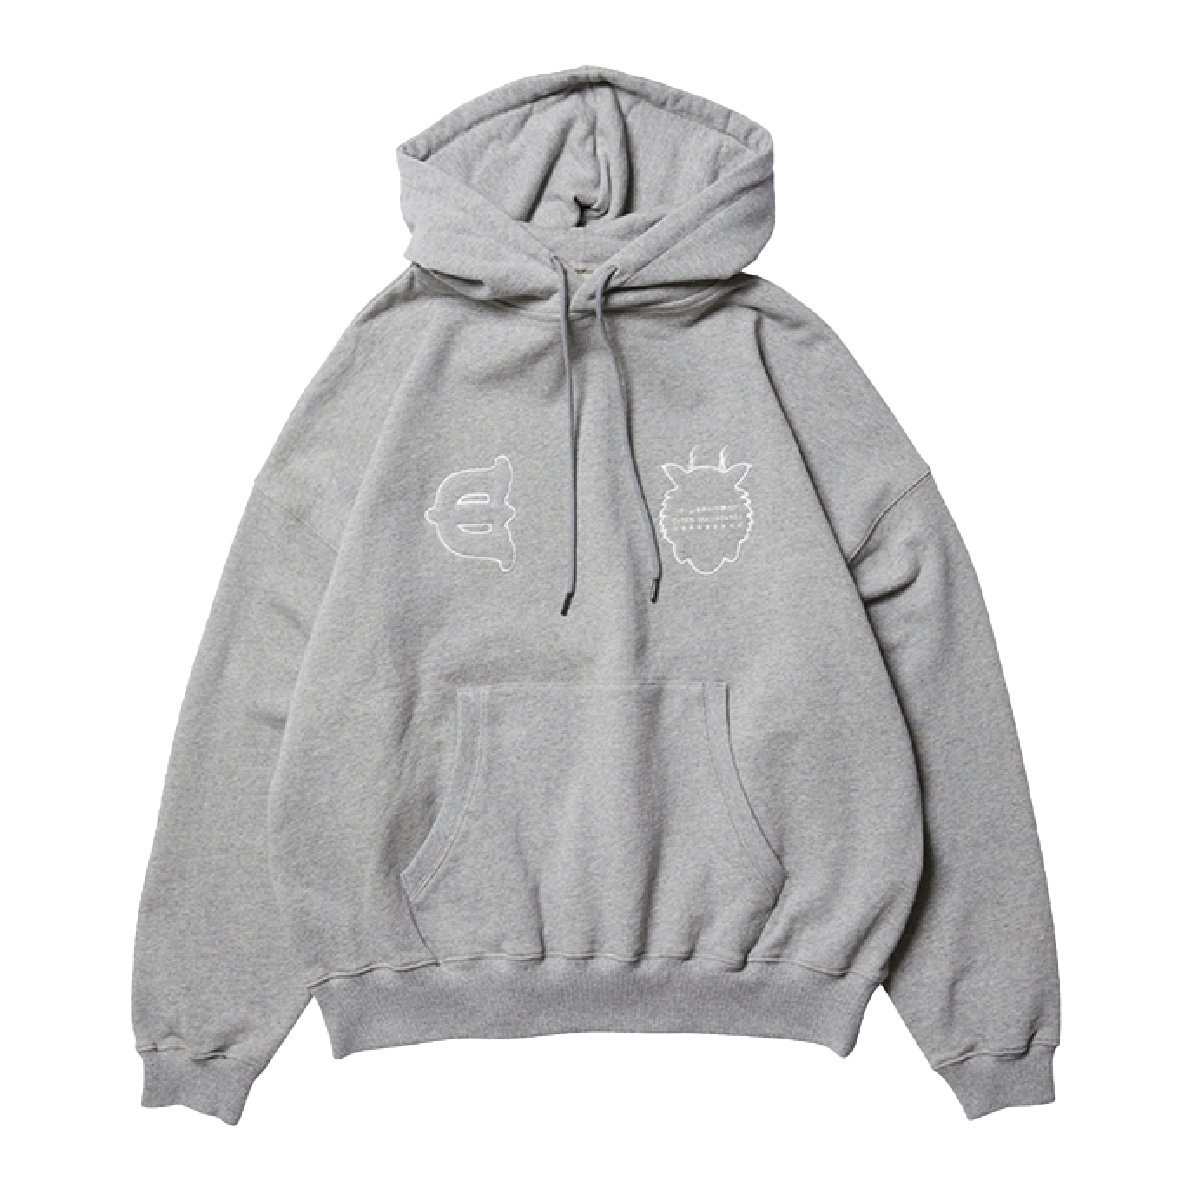 <img class='new_mark_img1' src='https://img.shop-pro.jp/img/new/icons8.gif' style='border:none;display:inline;margin:0px;padding:0px;width:auto;' />EVISENĲ̳Tora Evi Logo Hoodie (Grey)
                          </a>
            <span class=